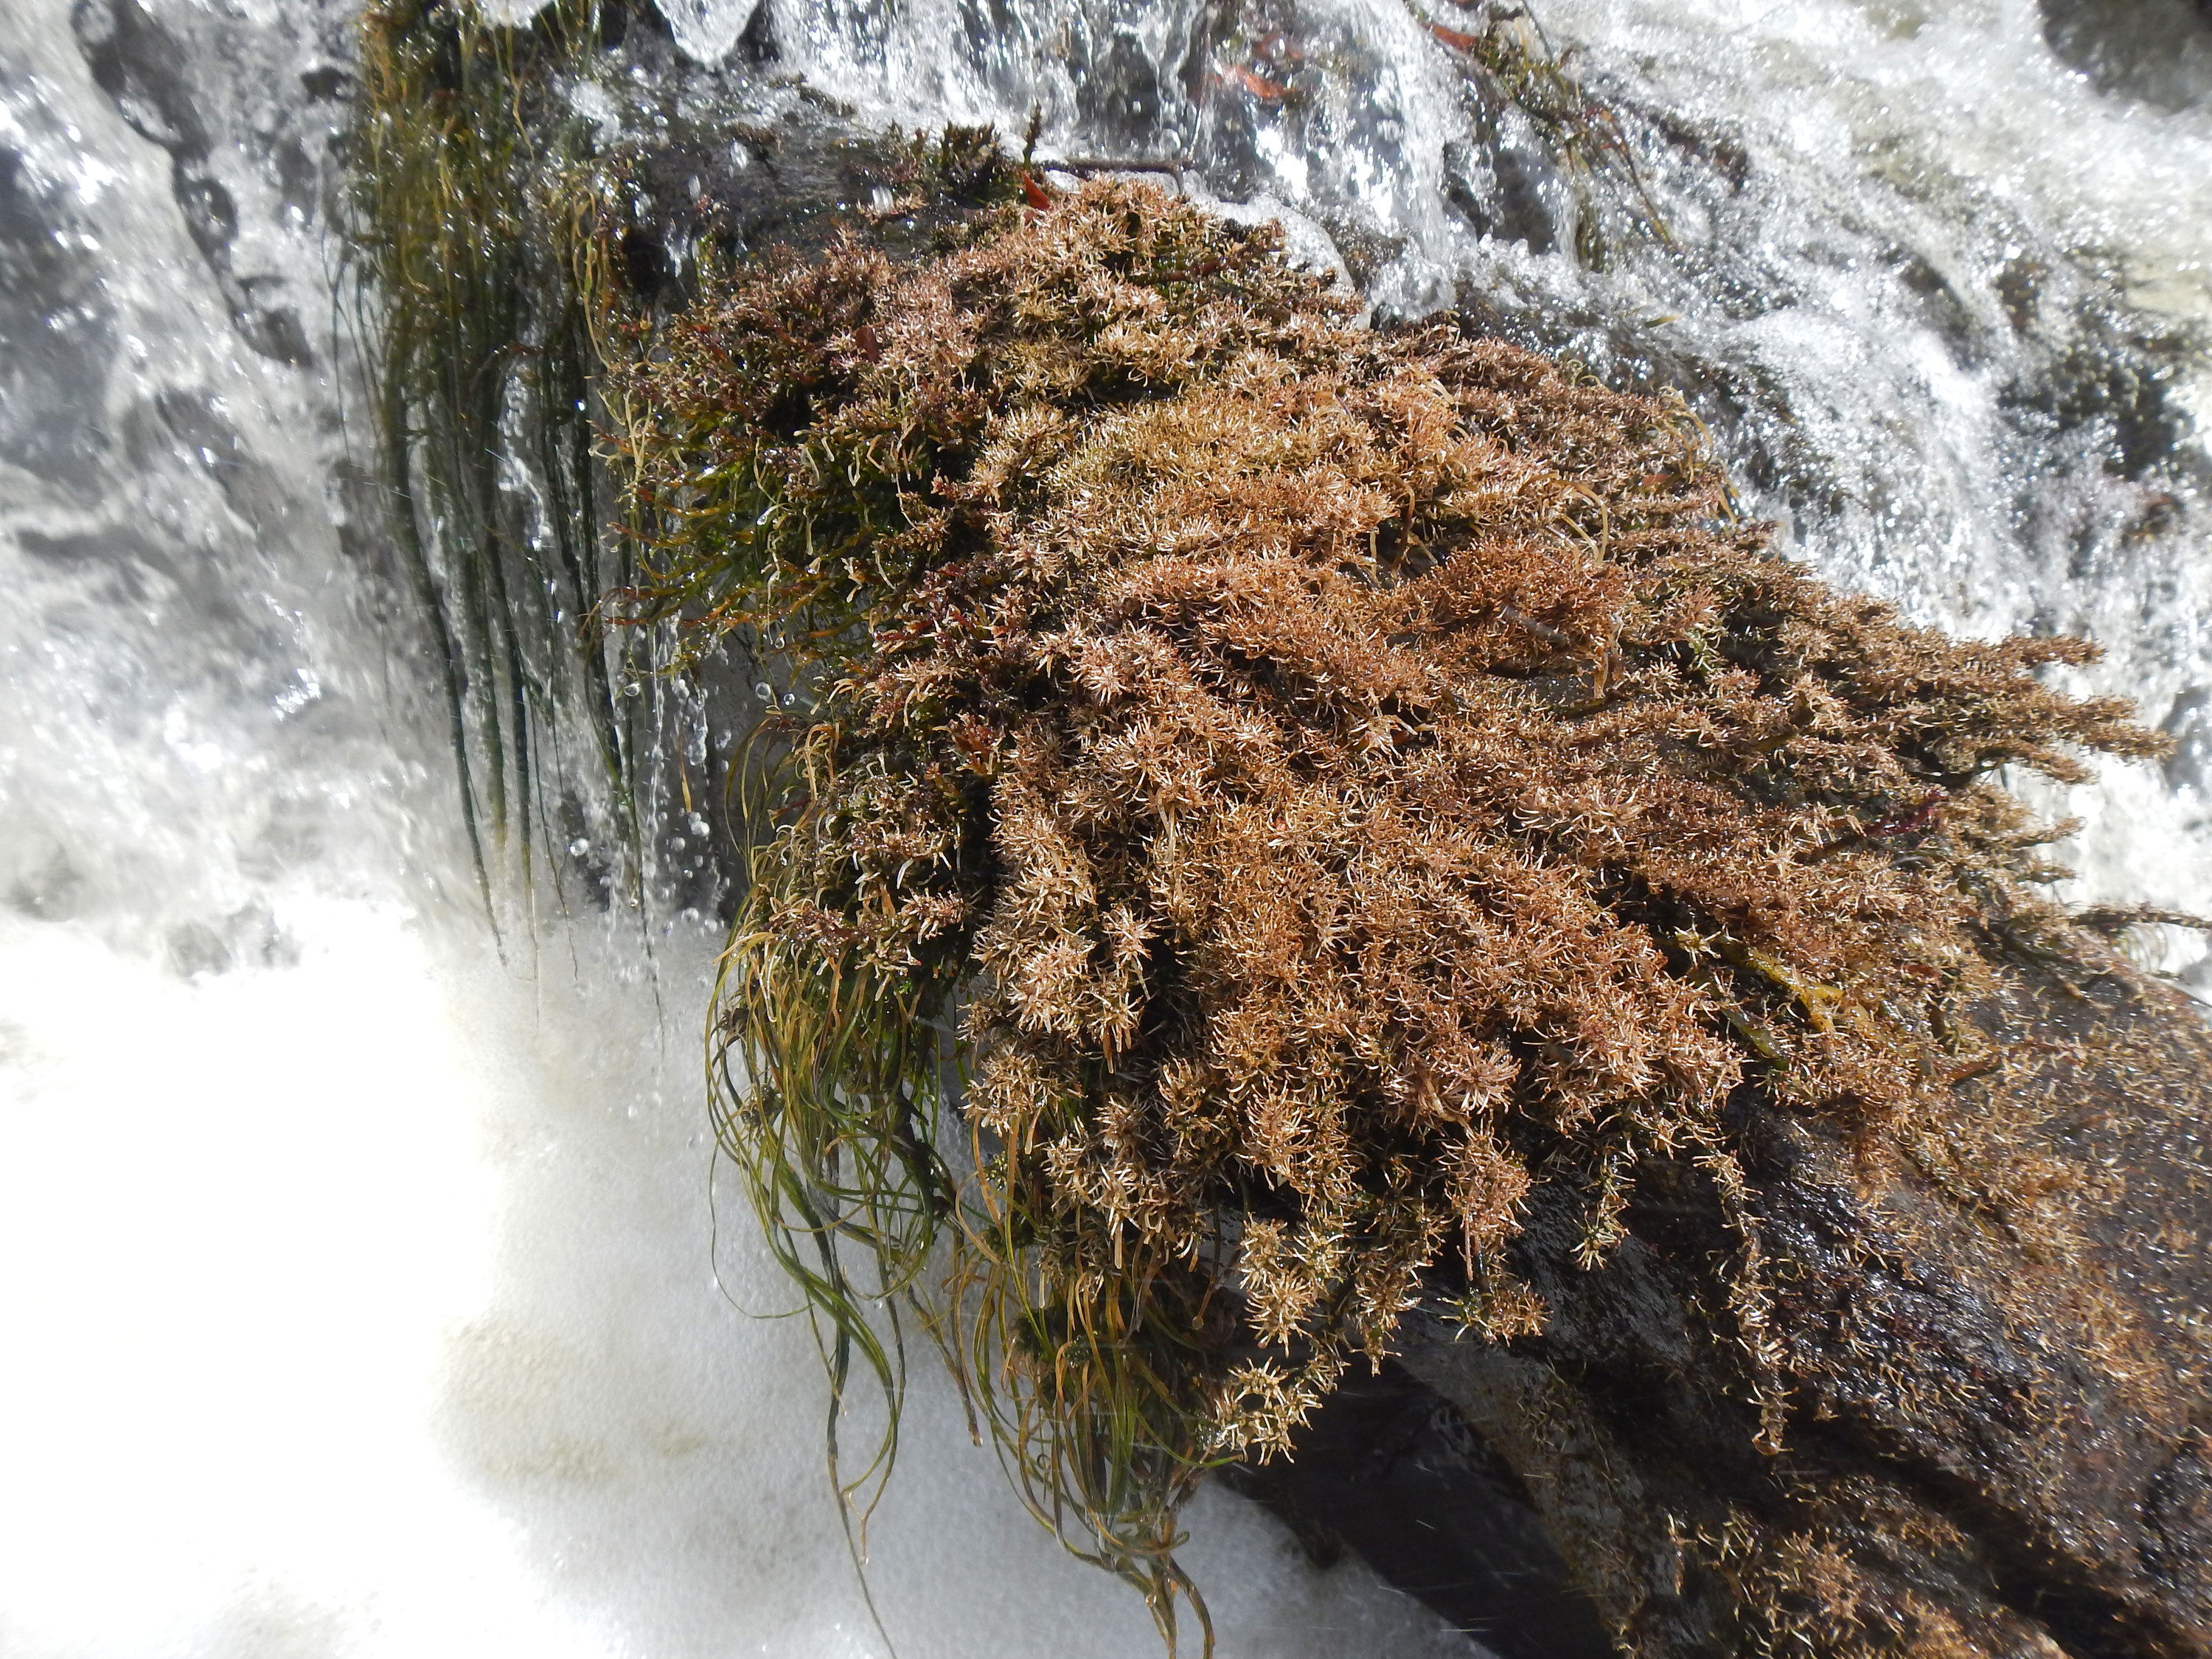 Brown plant with moss-like appearance in running water.